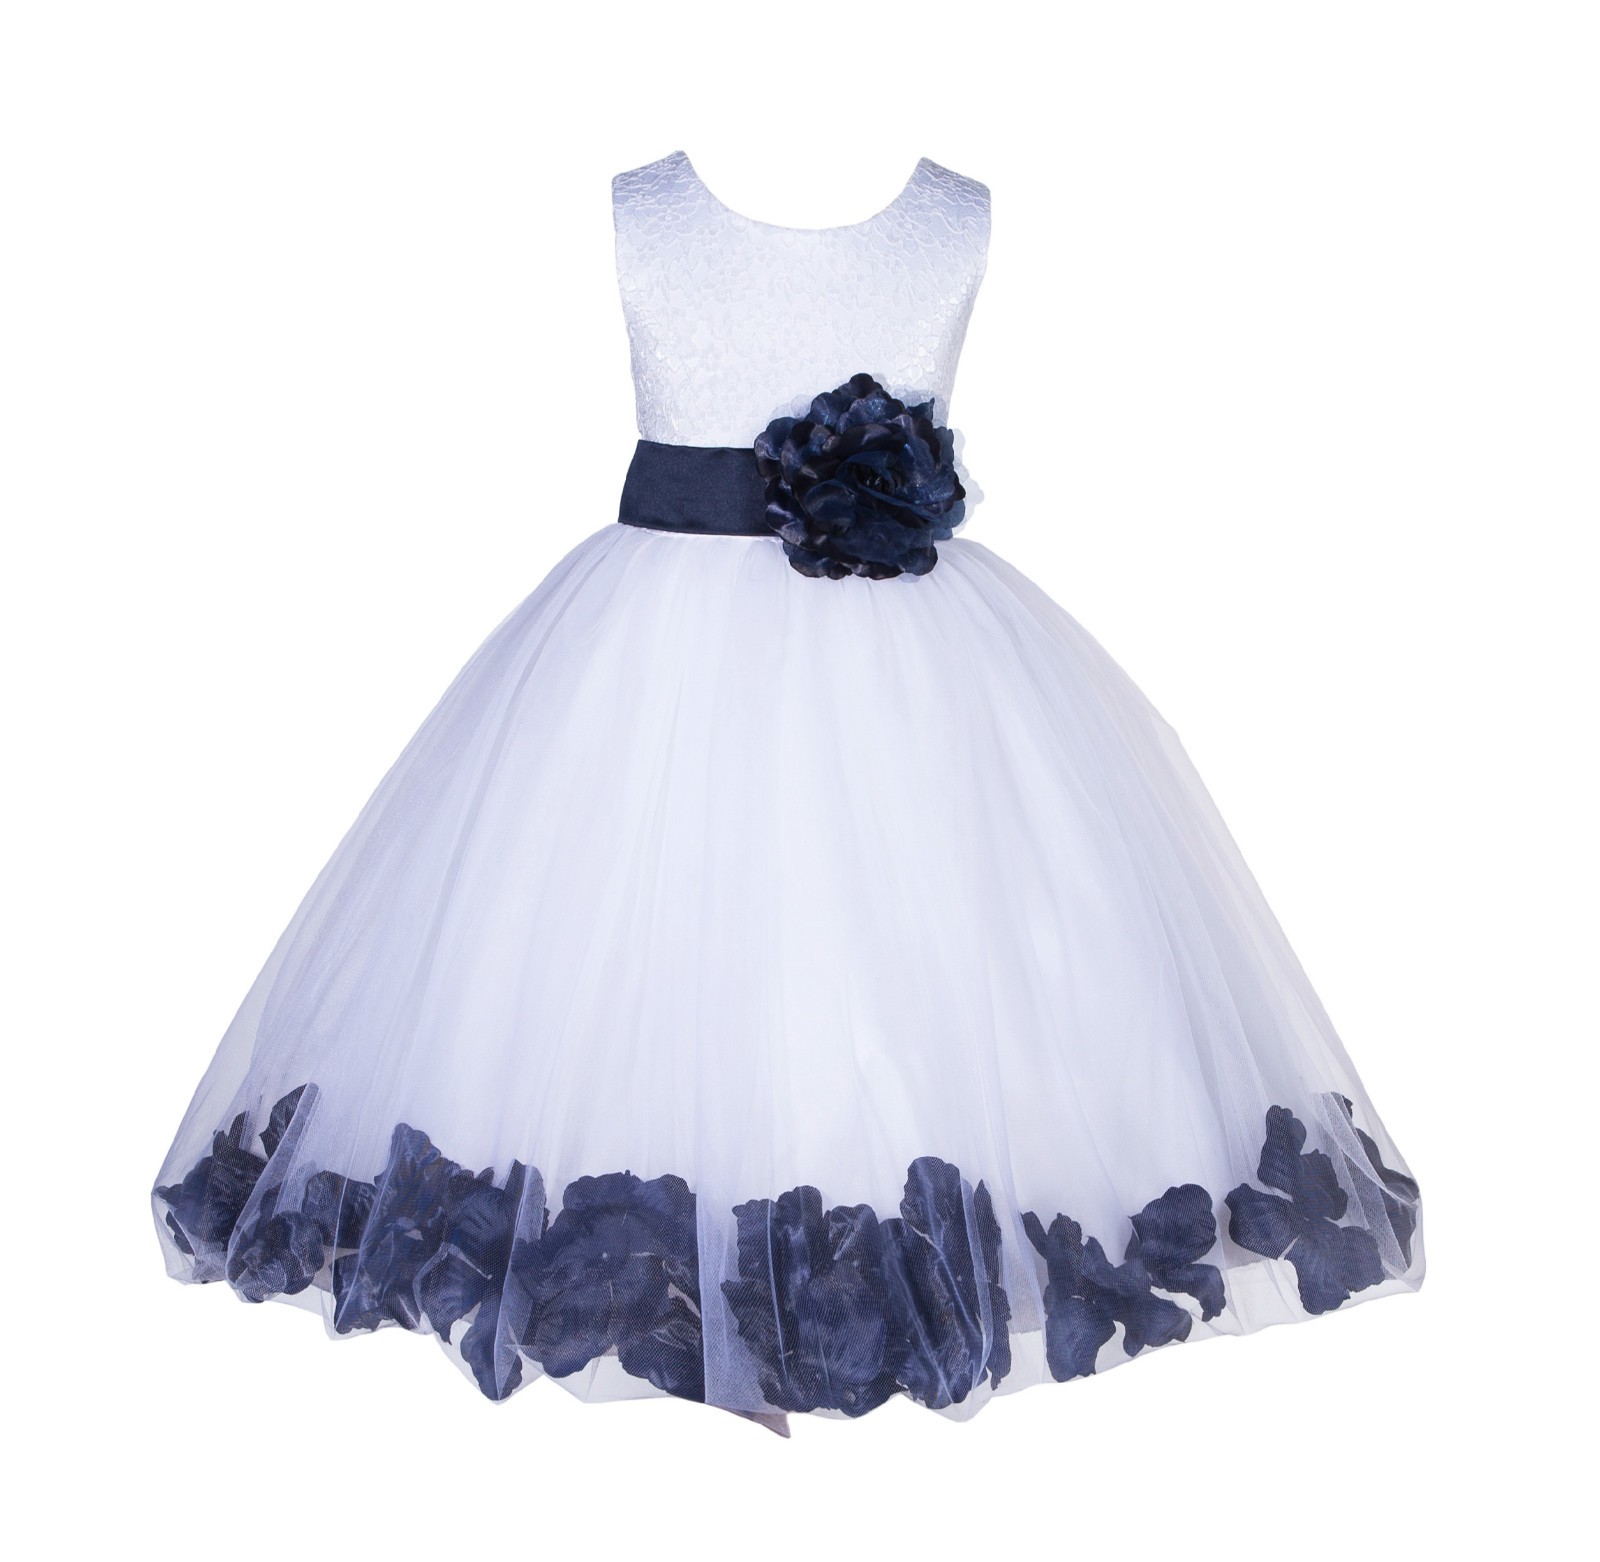 White/Marine Lace Top Tulle Floral Petals Flower Girl Dress 165S